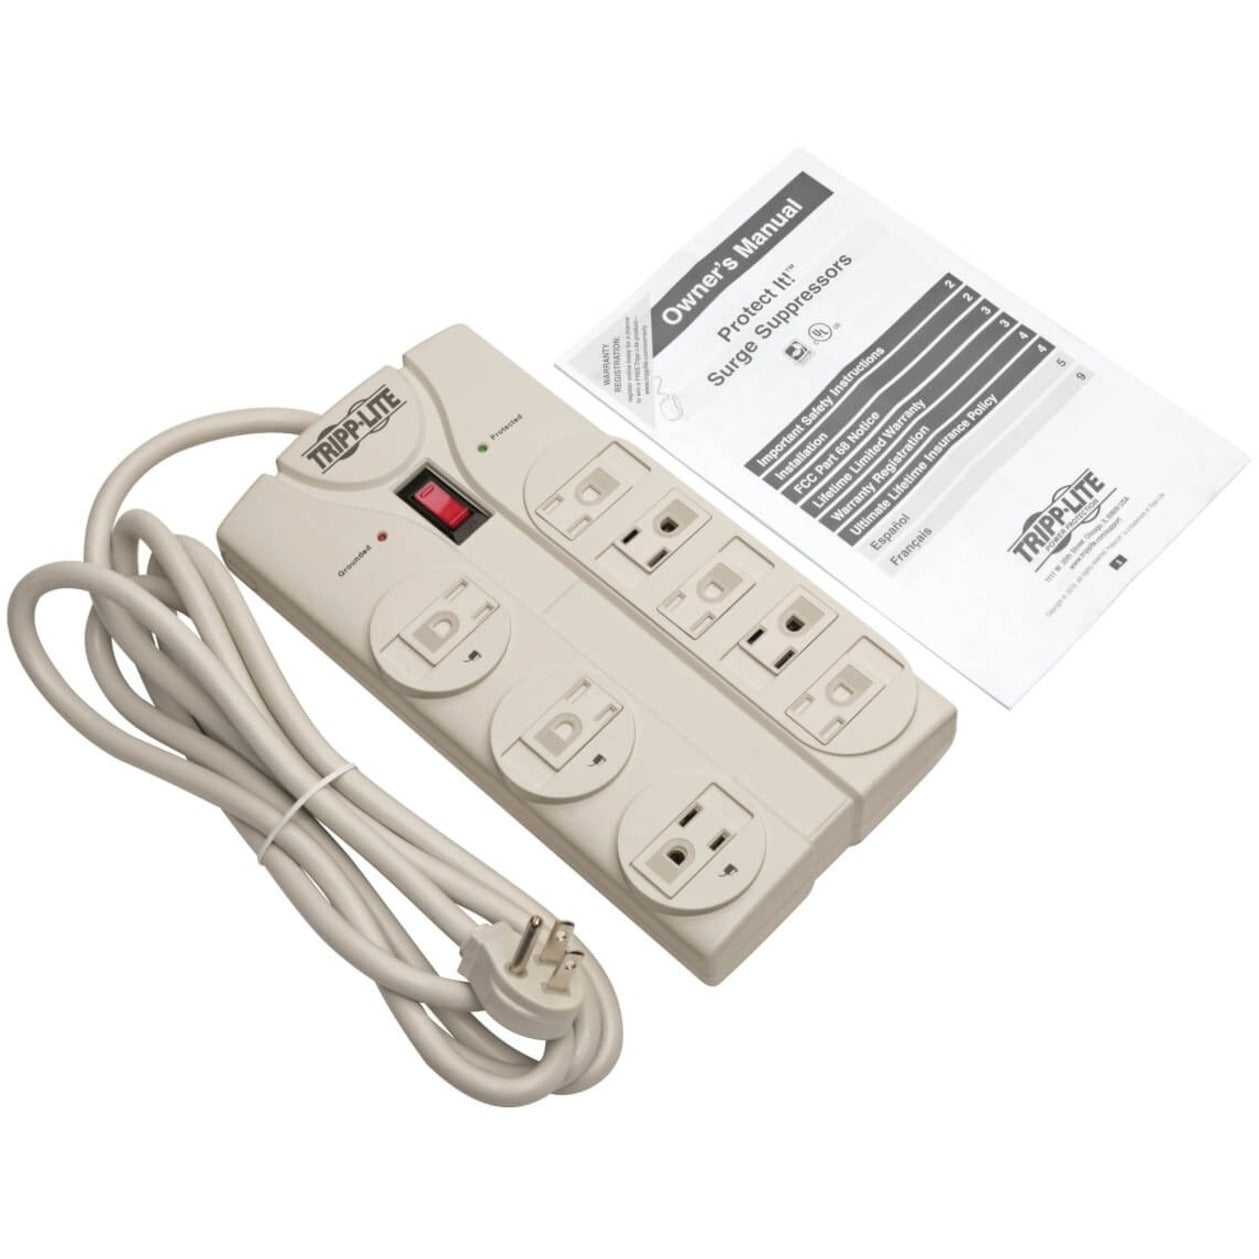 Tripp Lite TLP808 Protect It! 1440 Joule 8-Outlet Surge Protector, 8' Cord, Gray